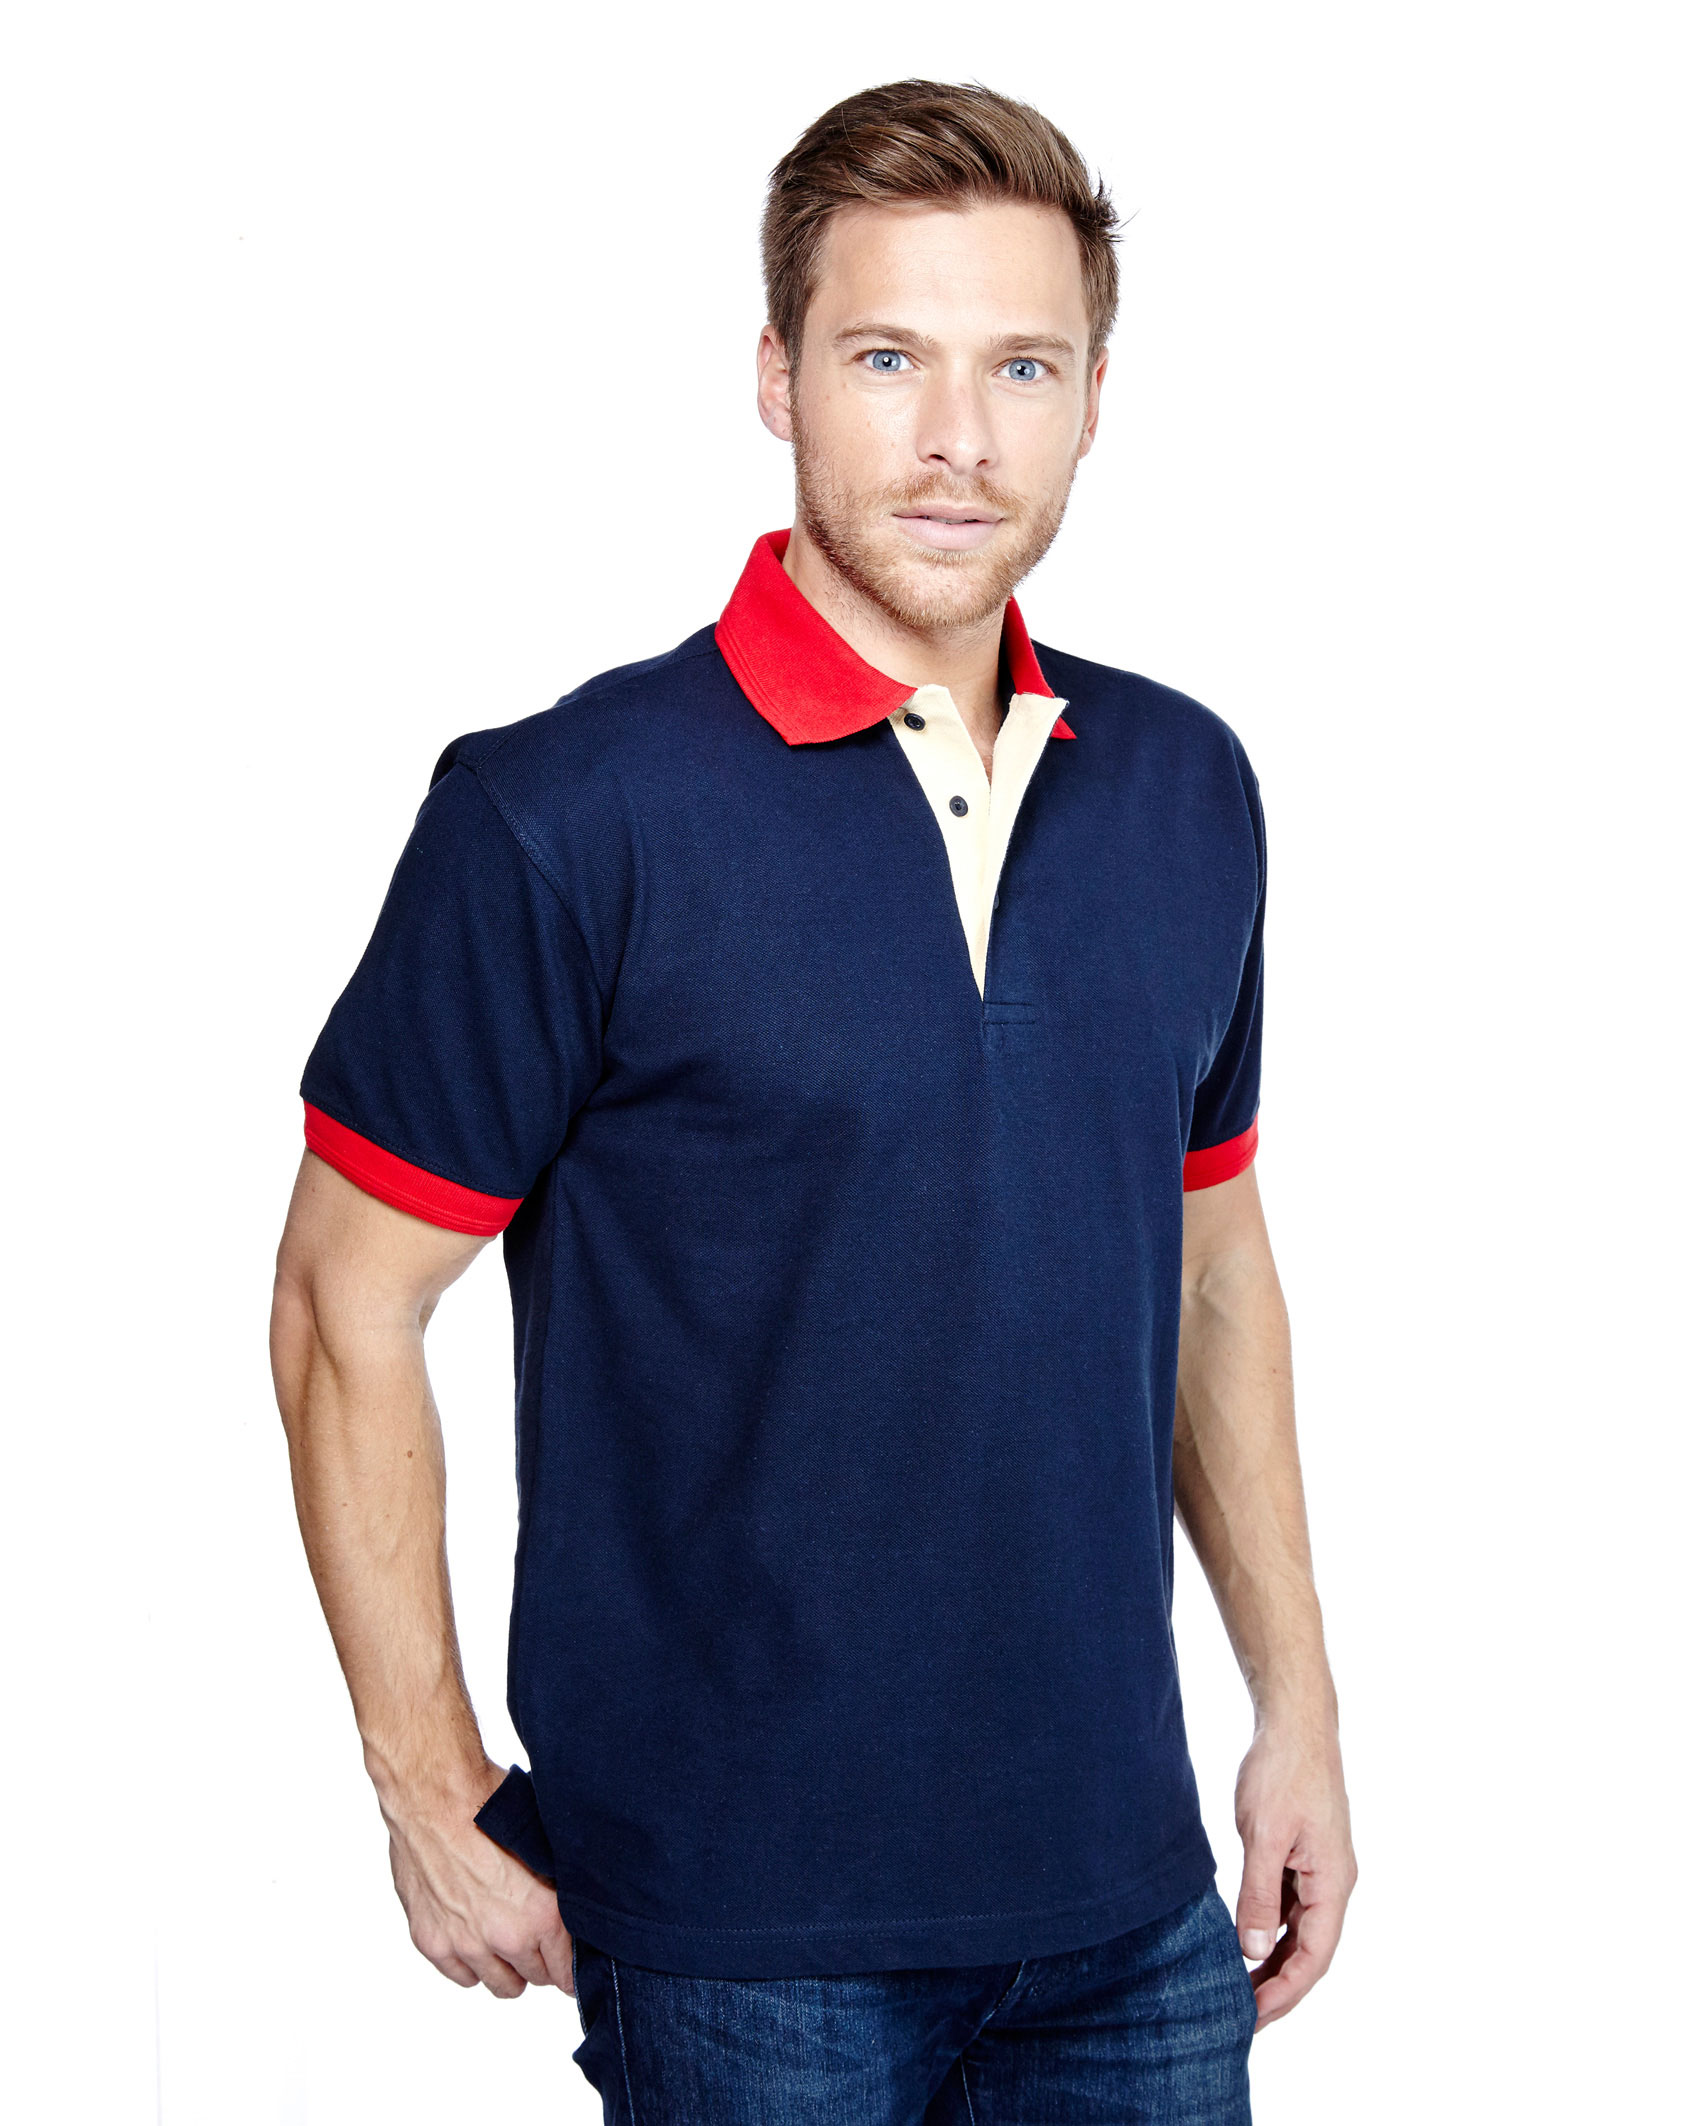 Contrast Pique Polo Shirt by Uneek Clothing